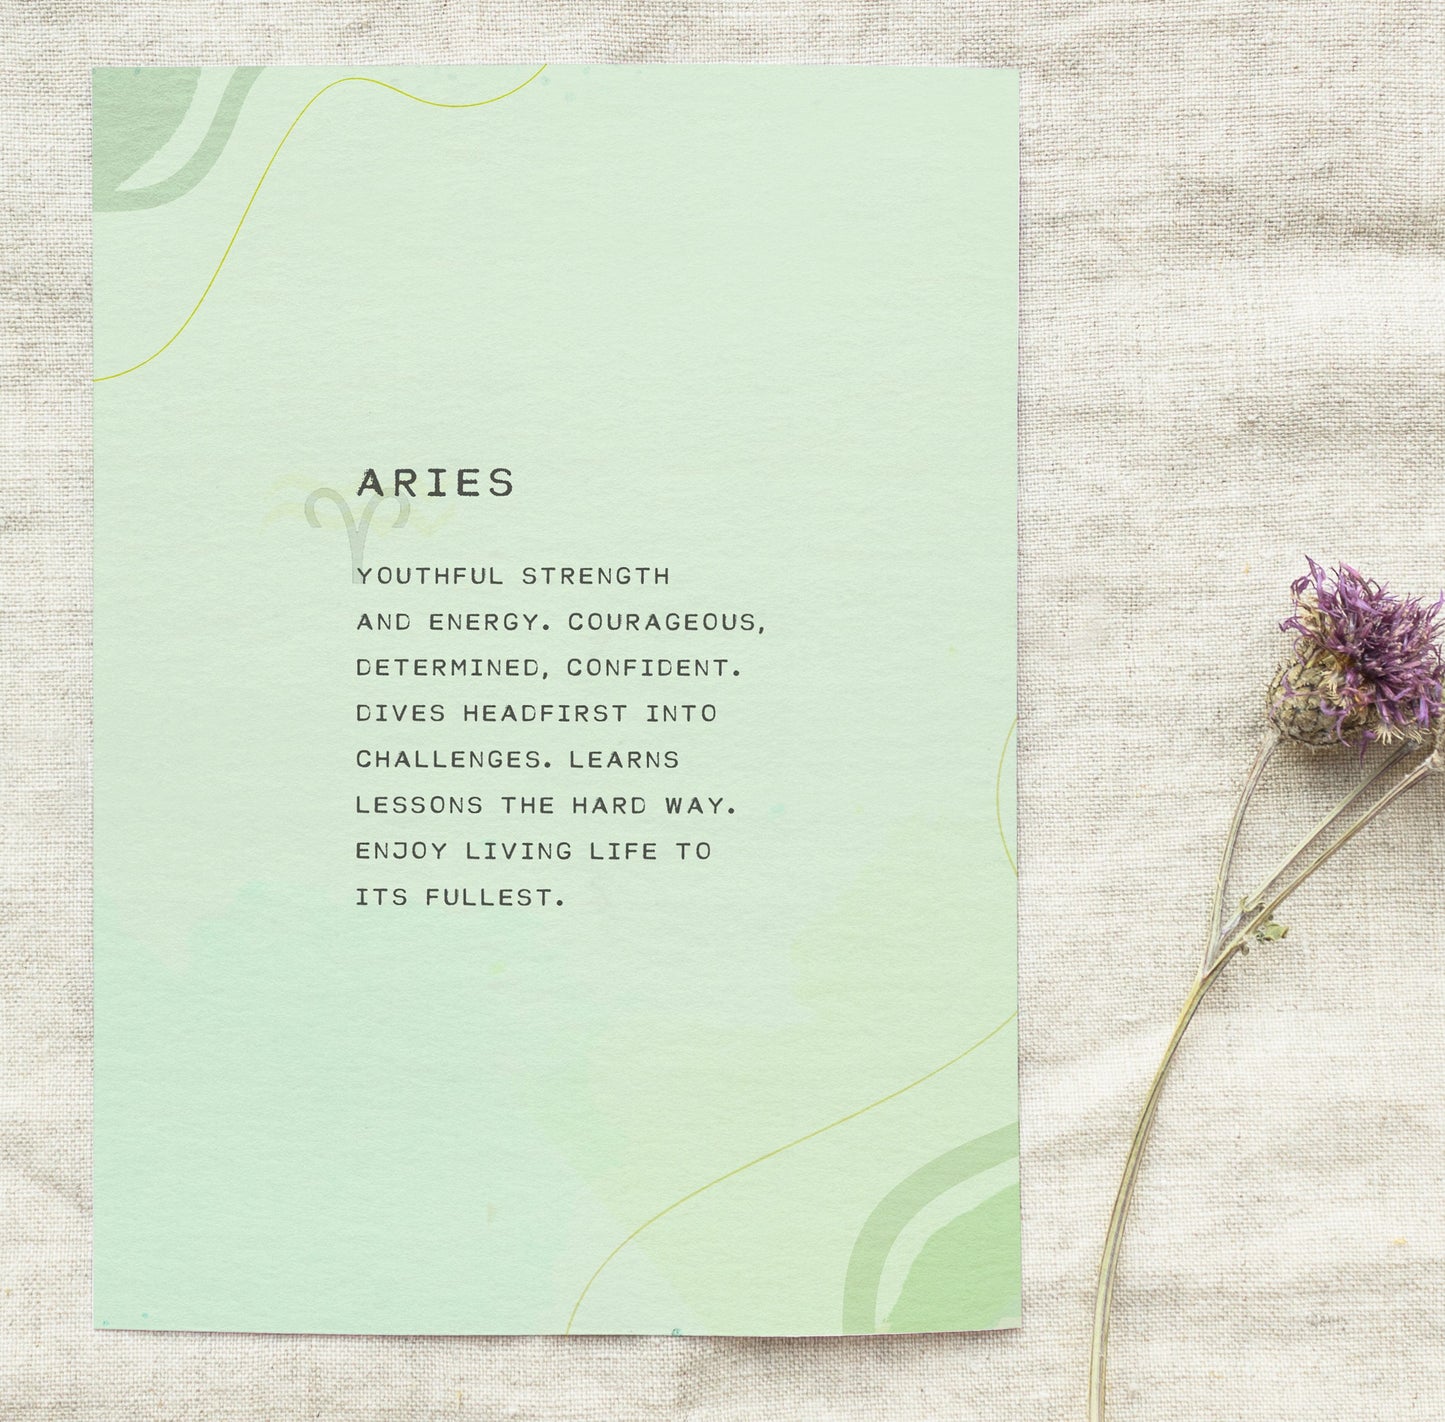 Aries zodiac art with quote